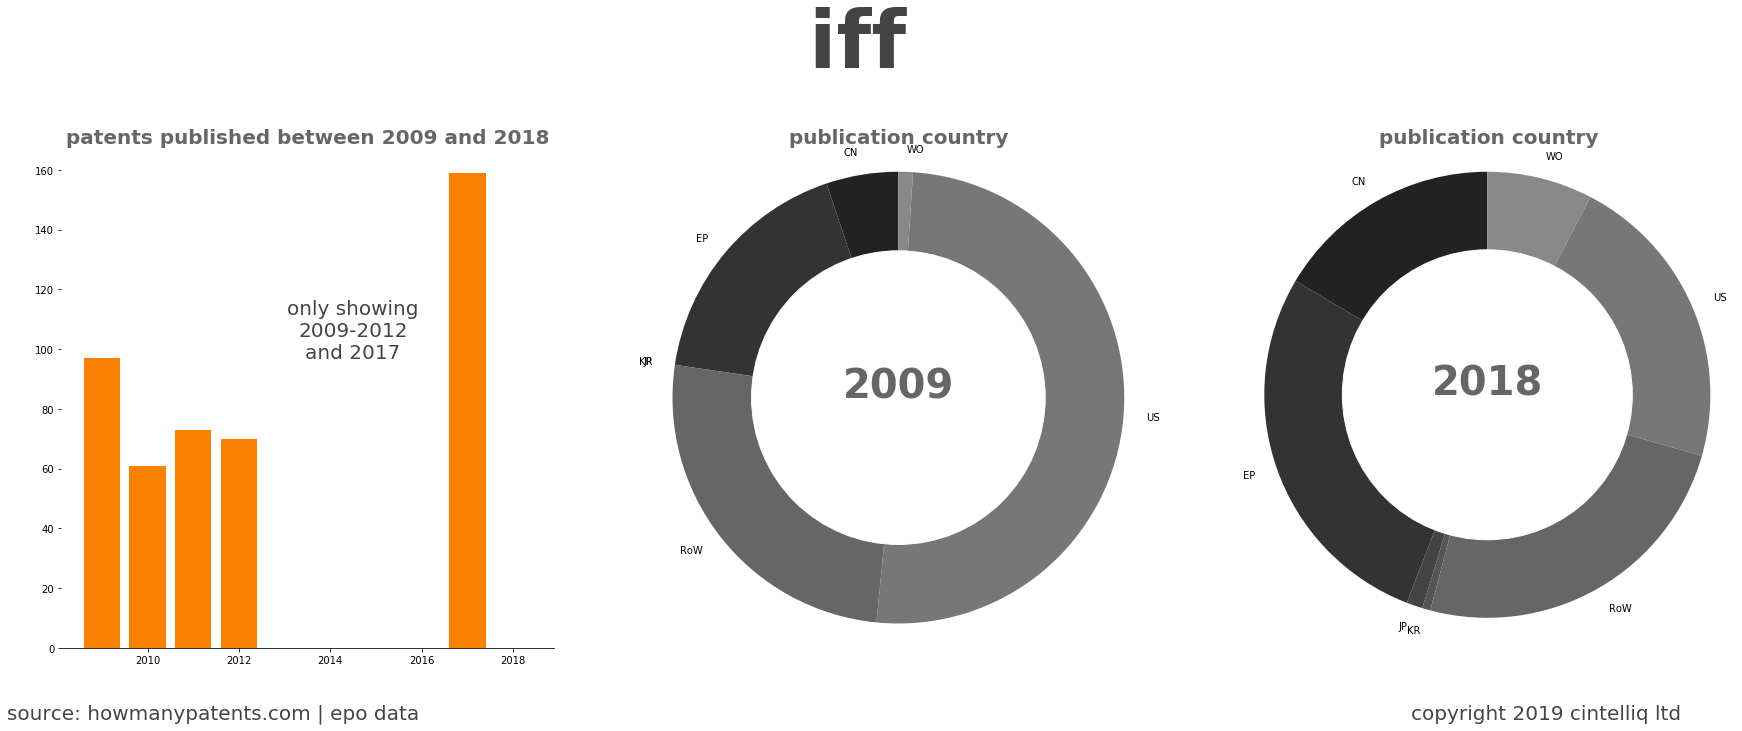 summary of patents for Iff 